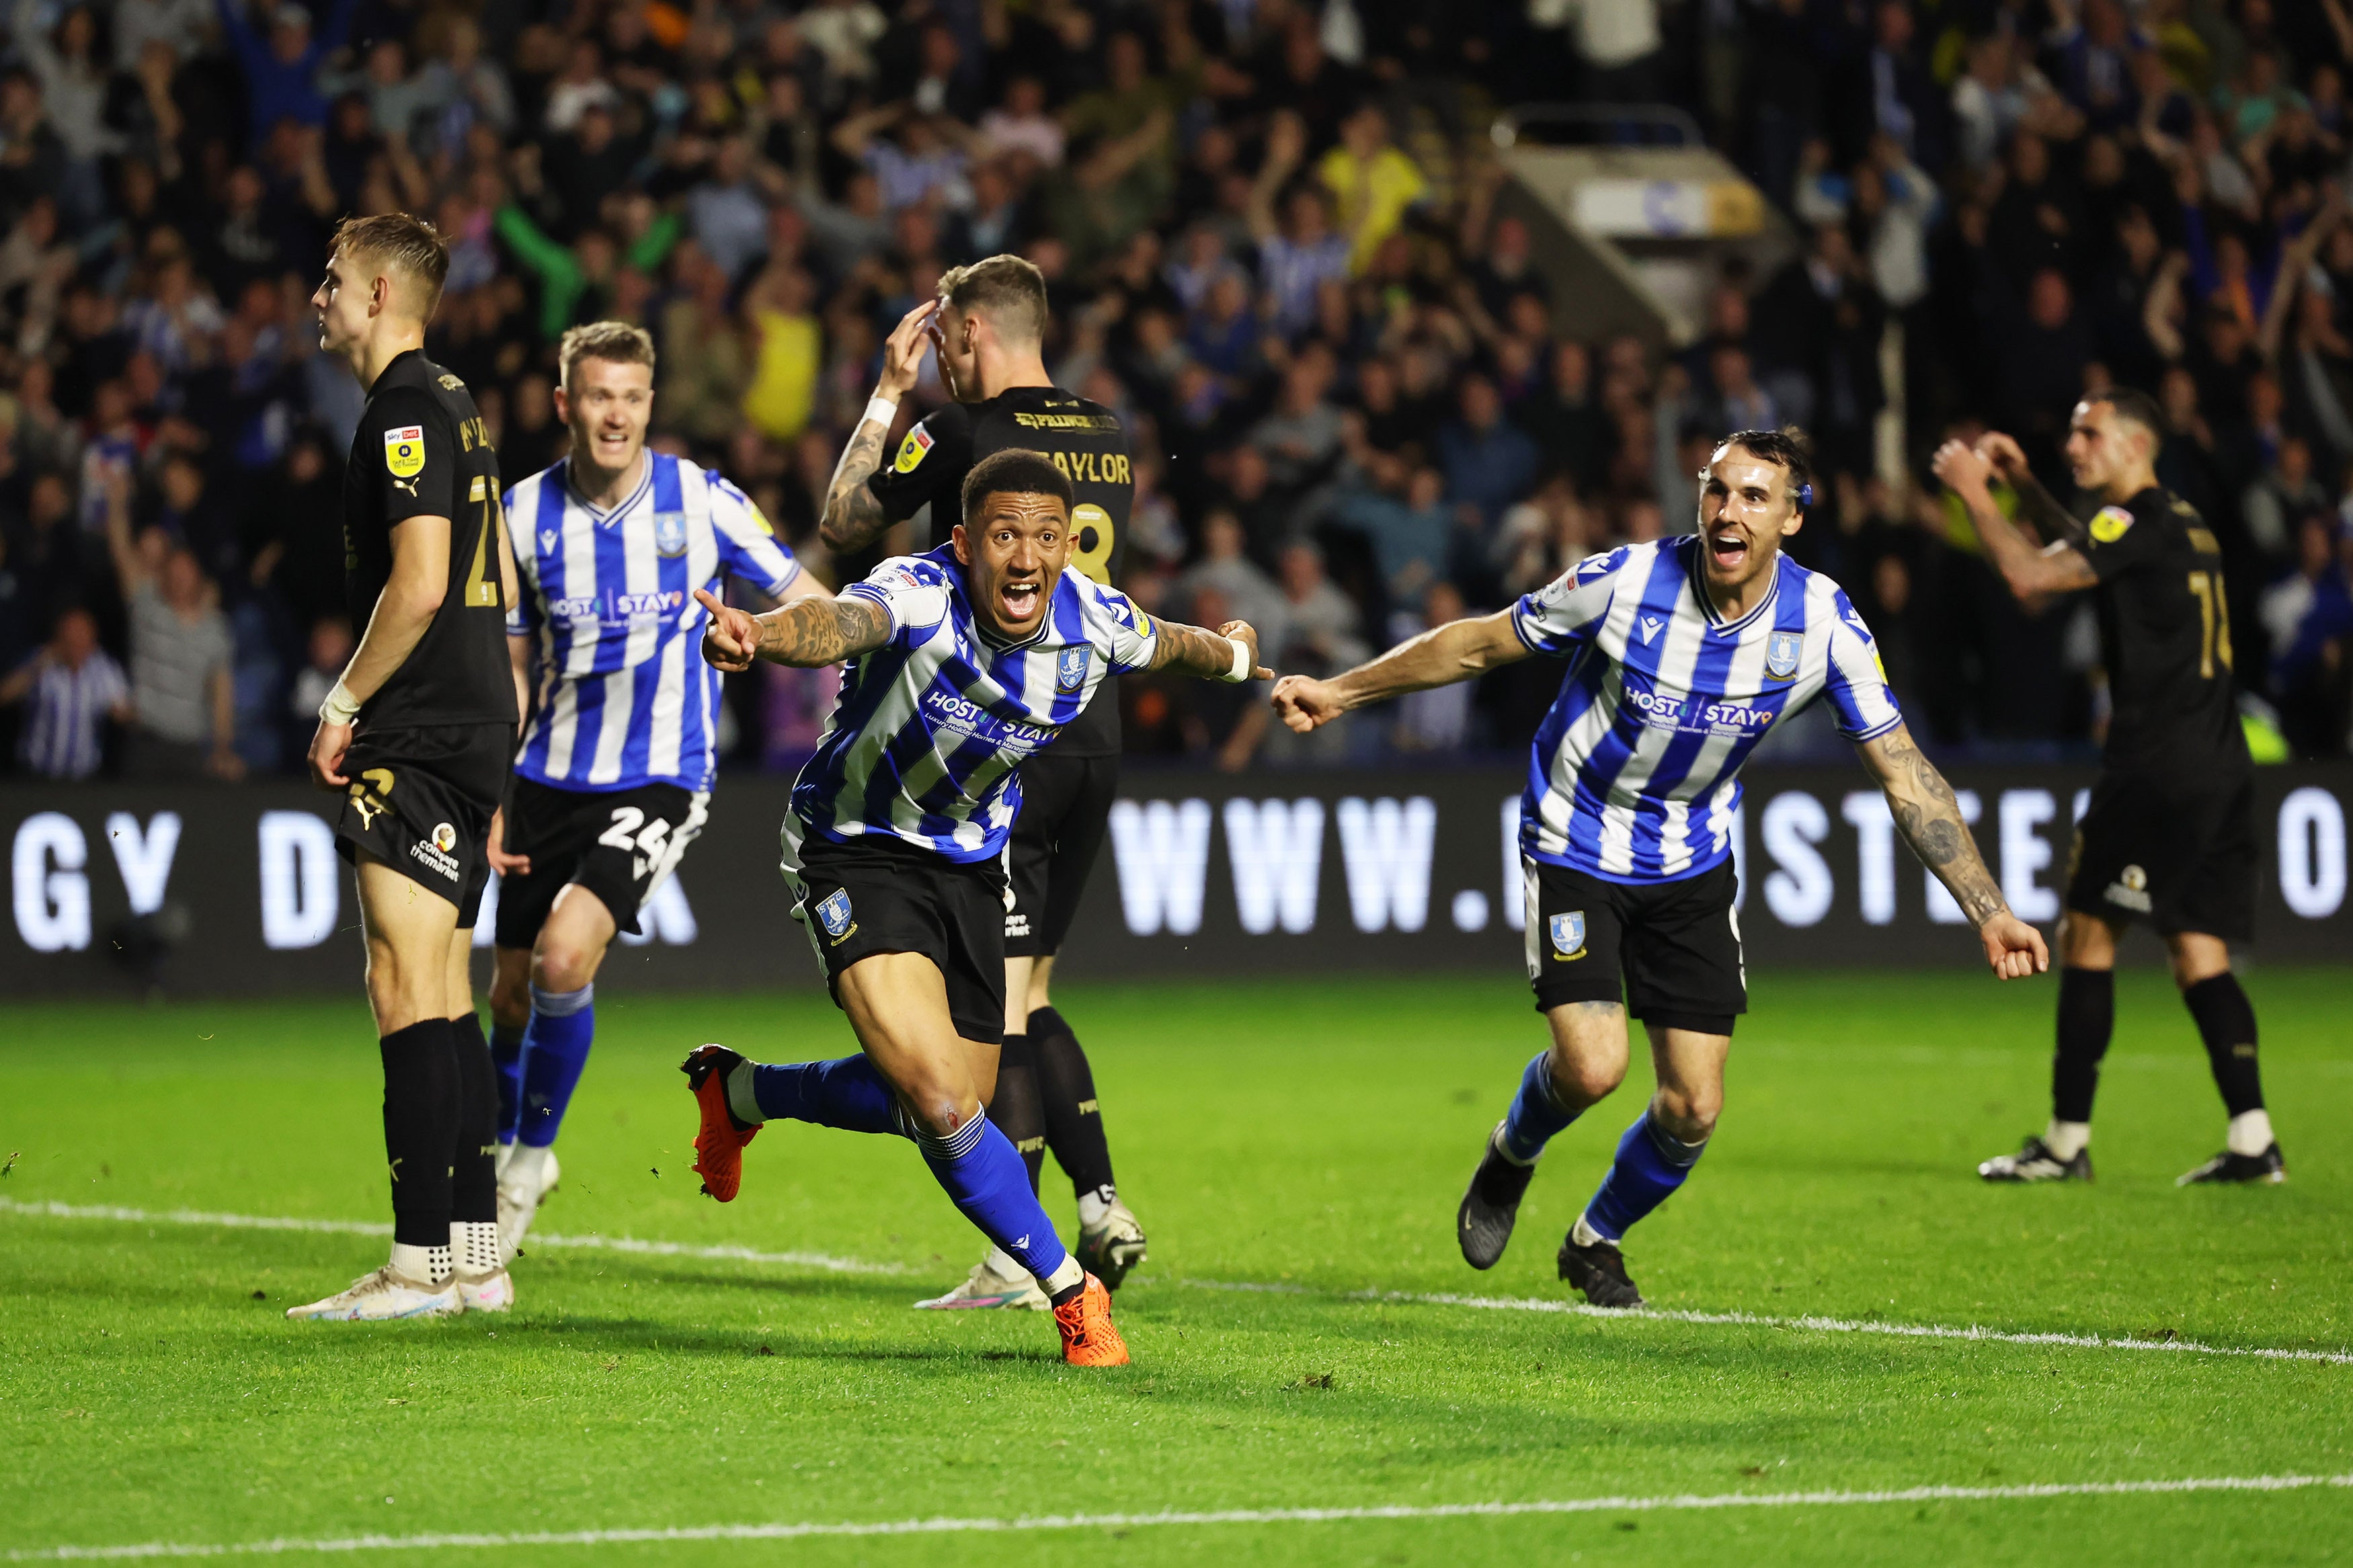 Sheffield Wednesday overturned a 4-0 deficit to somehow reach the League One play-off final